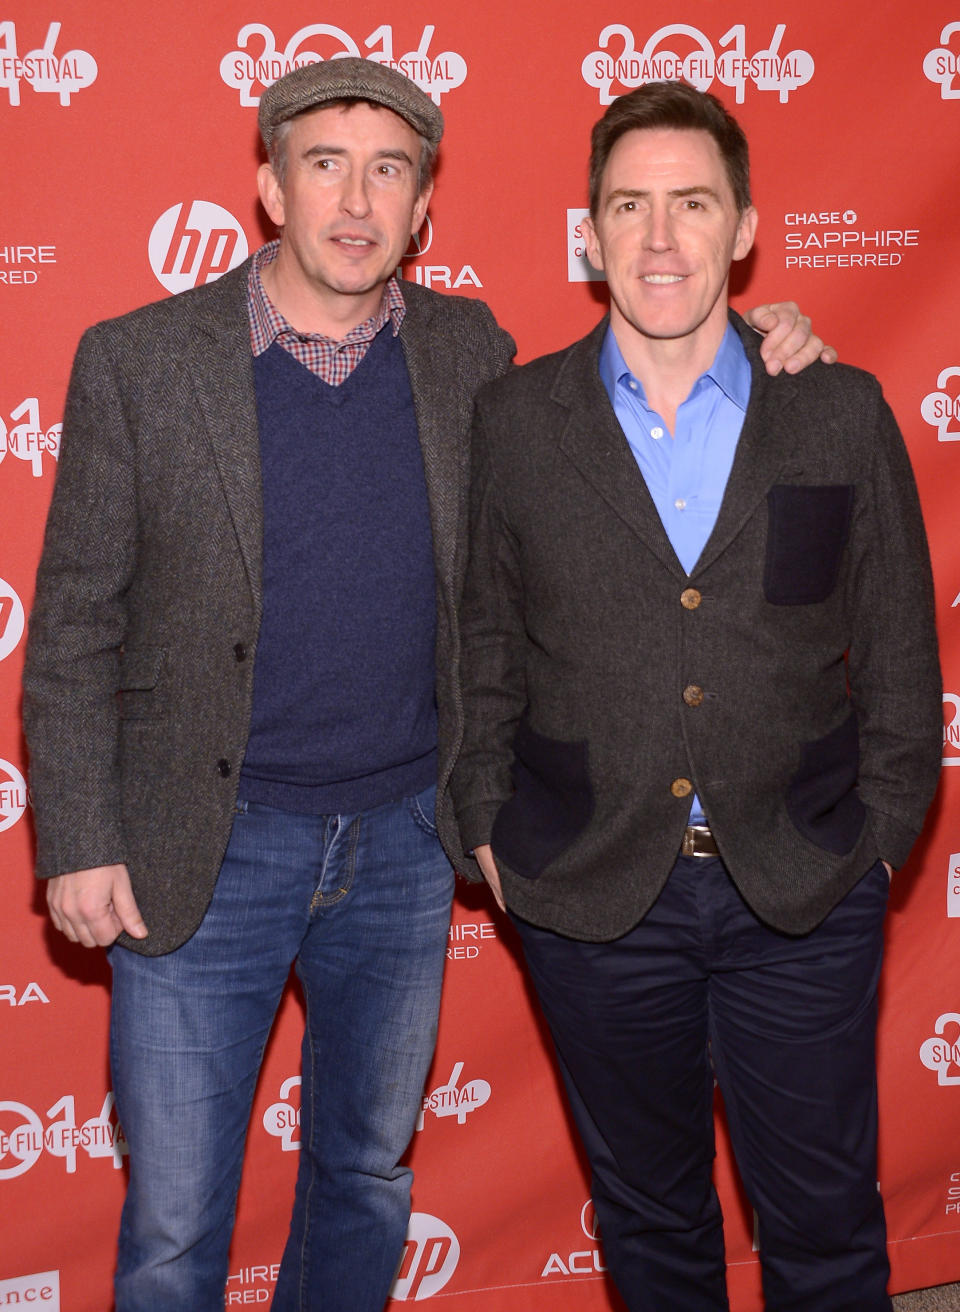 PARK CITY, UT - JANUARY 20: Steve Coogan and Rob Brydon attend the premiere of 'The Trip To Italy' at the Eccles Center Theatre during the 2014 Sundance Film Festival on January 20, 2014 in Park City, Utah.  (Photo by Michael Loccisano/Getty Images for Sundance Film Festival)